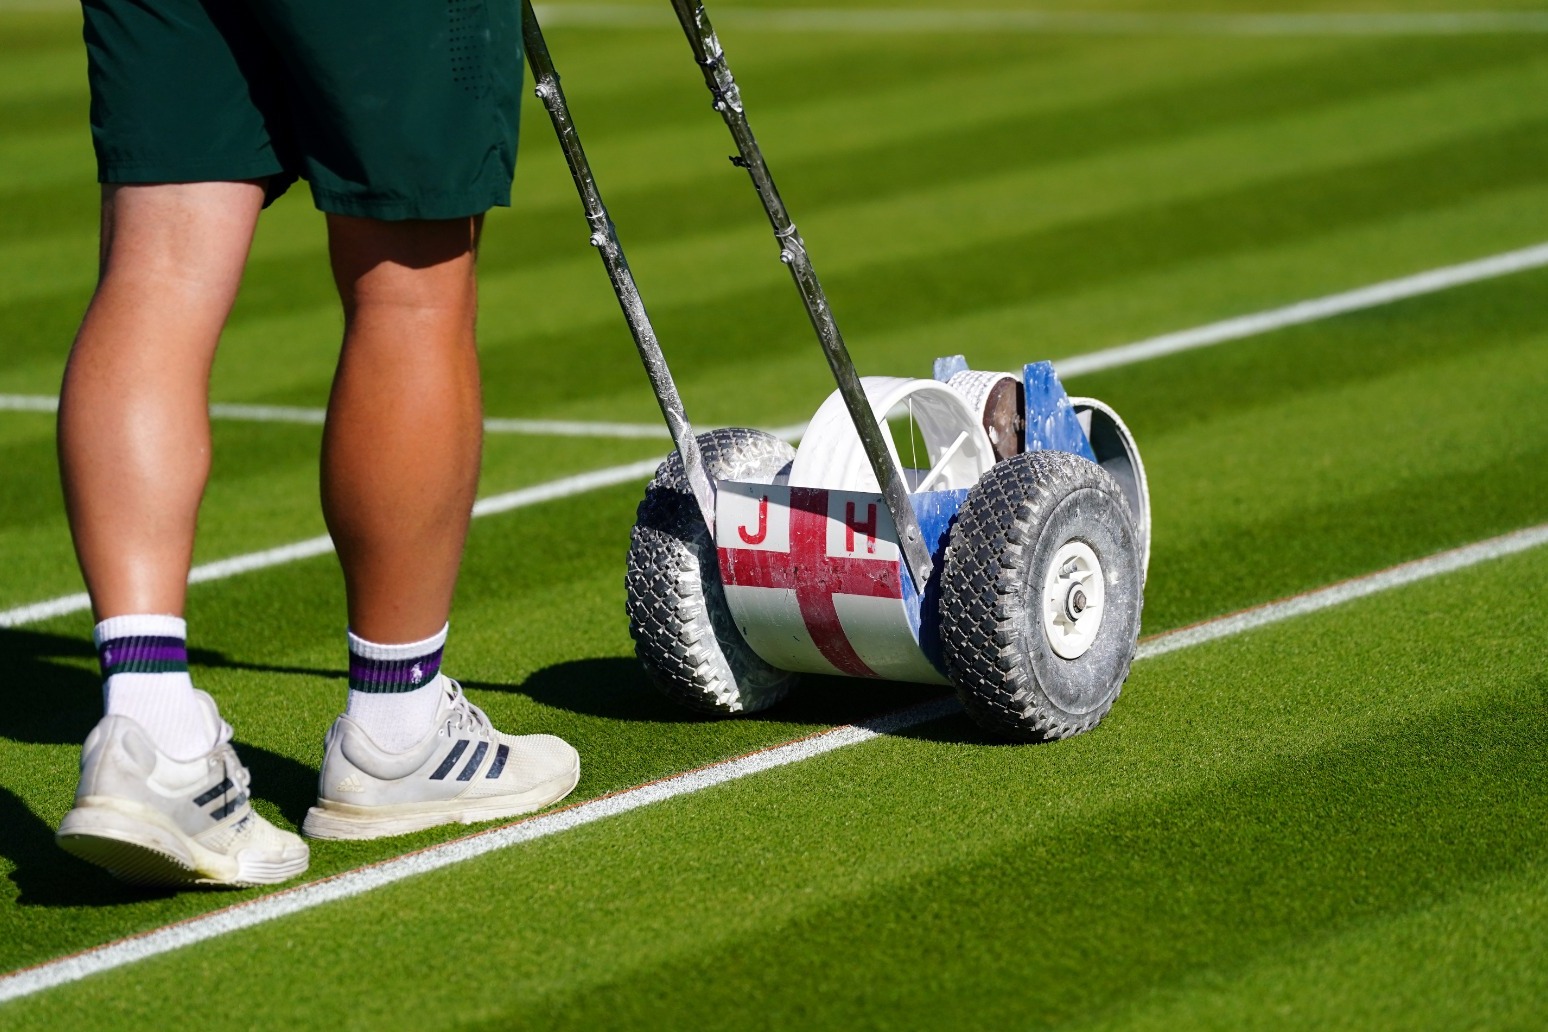 Thousands arrive at Wimbledon for first full-capacity tournament in three years 